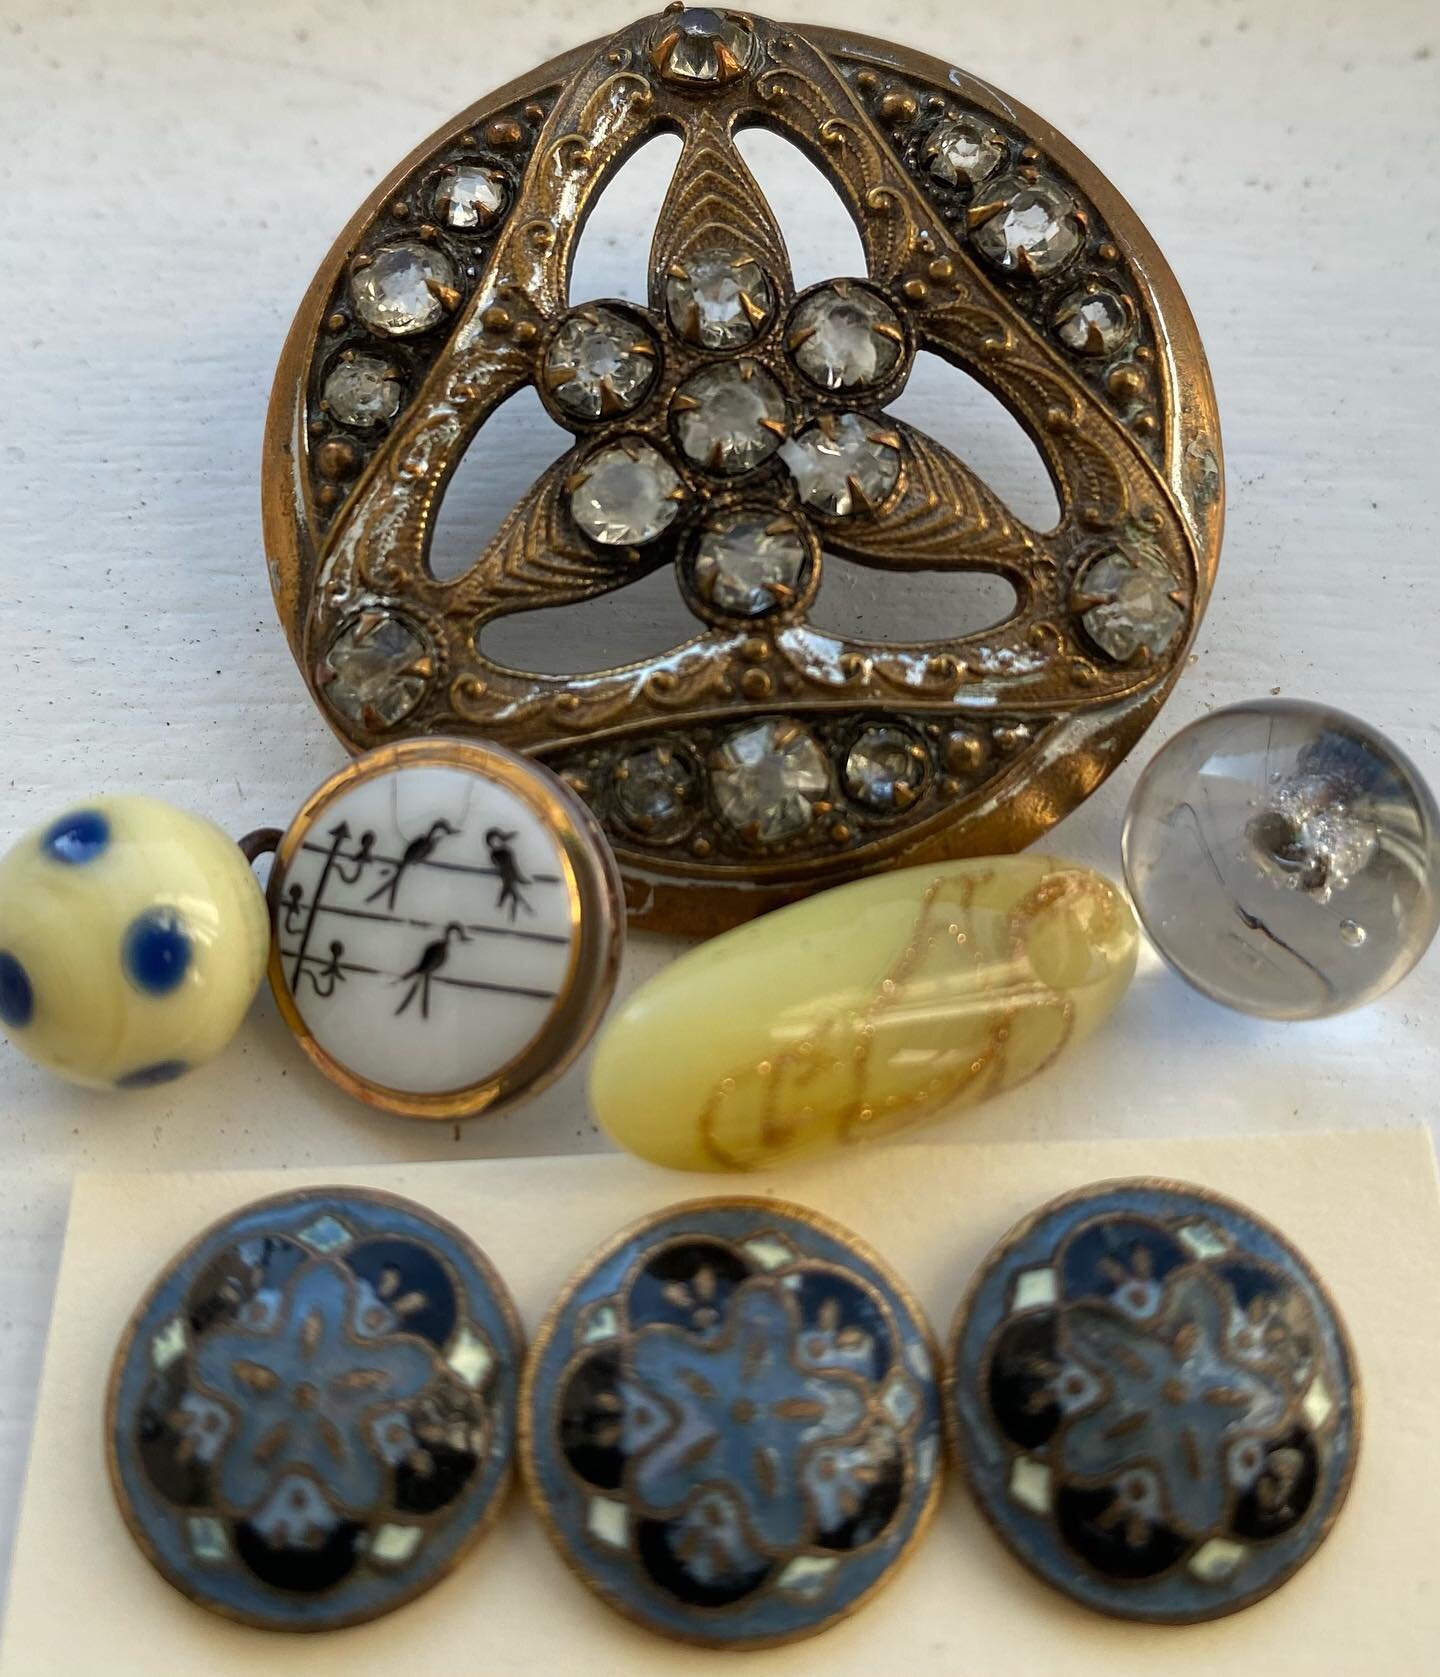 Part of the next batch of antique buttons added to website today #antiquebuttons #vintagebuttons #glassbuttons #pastebutton #enamelbutton